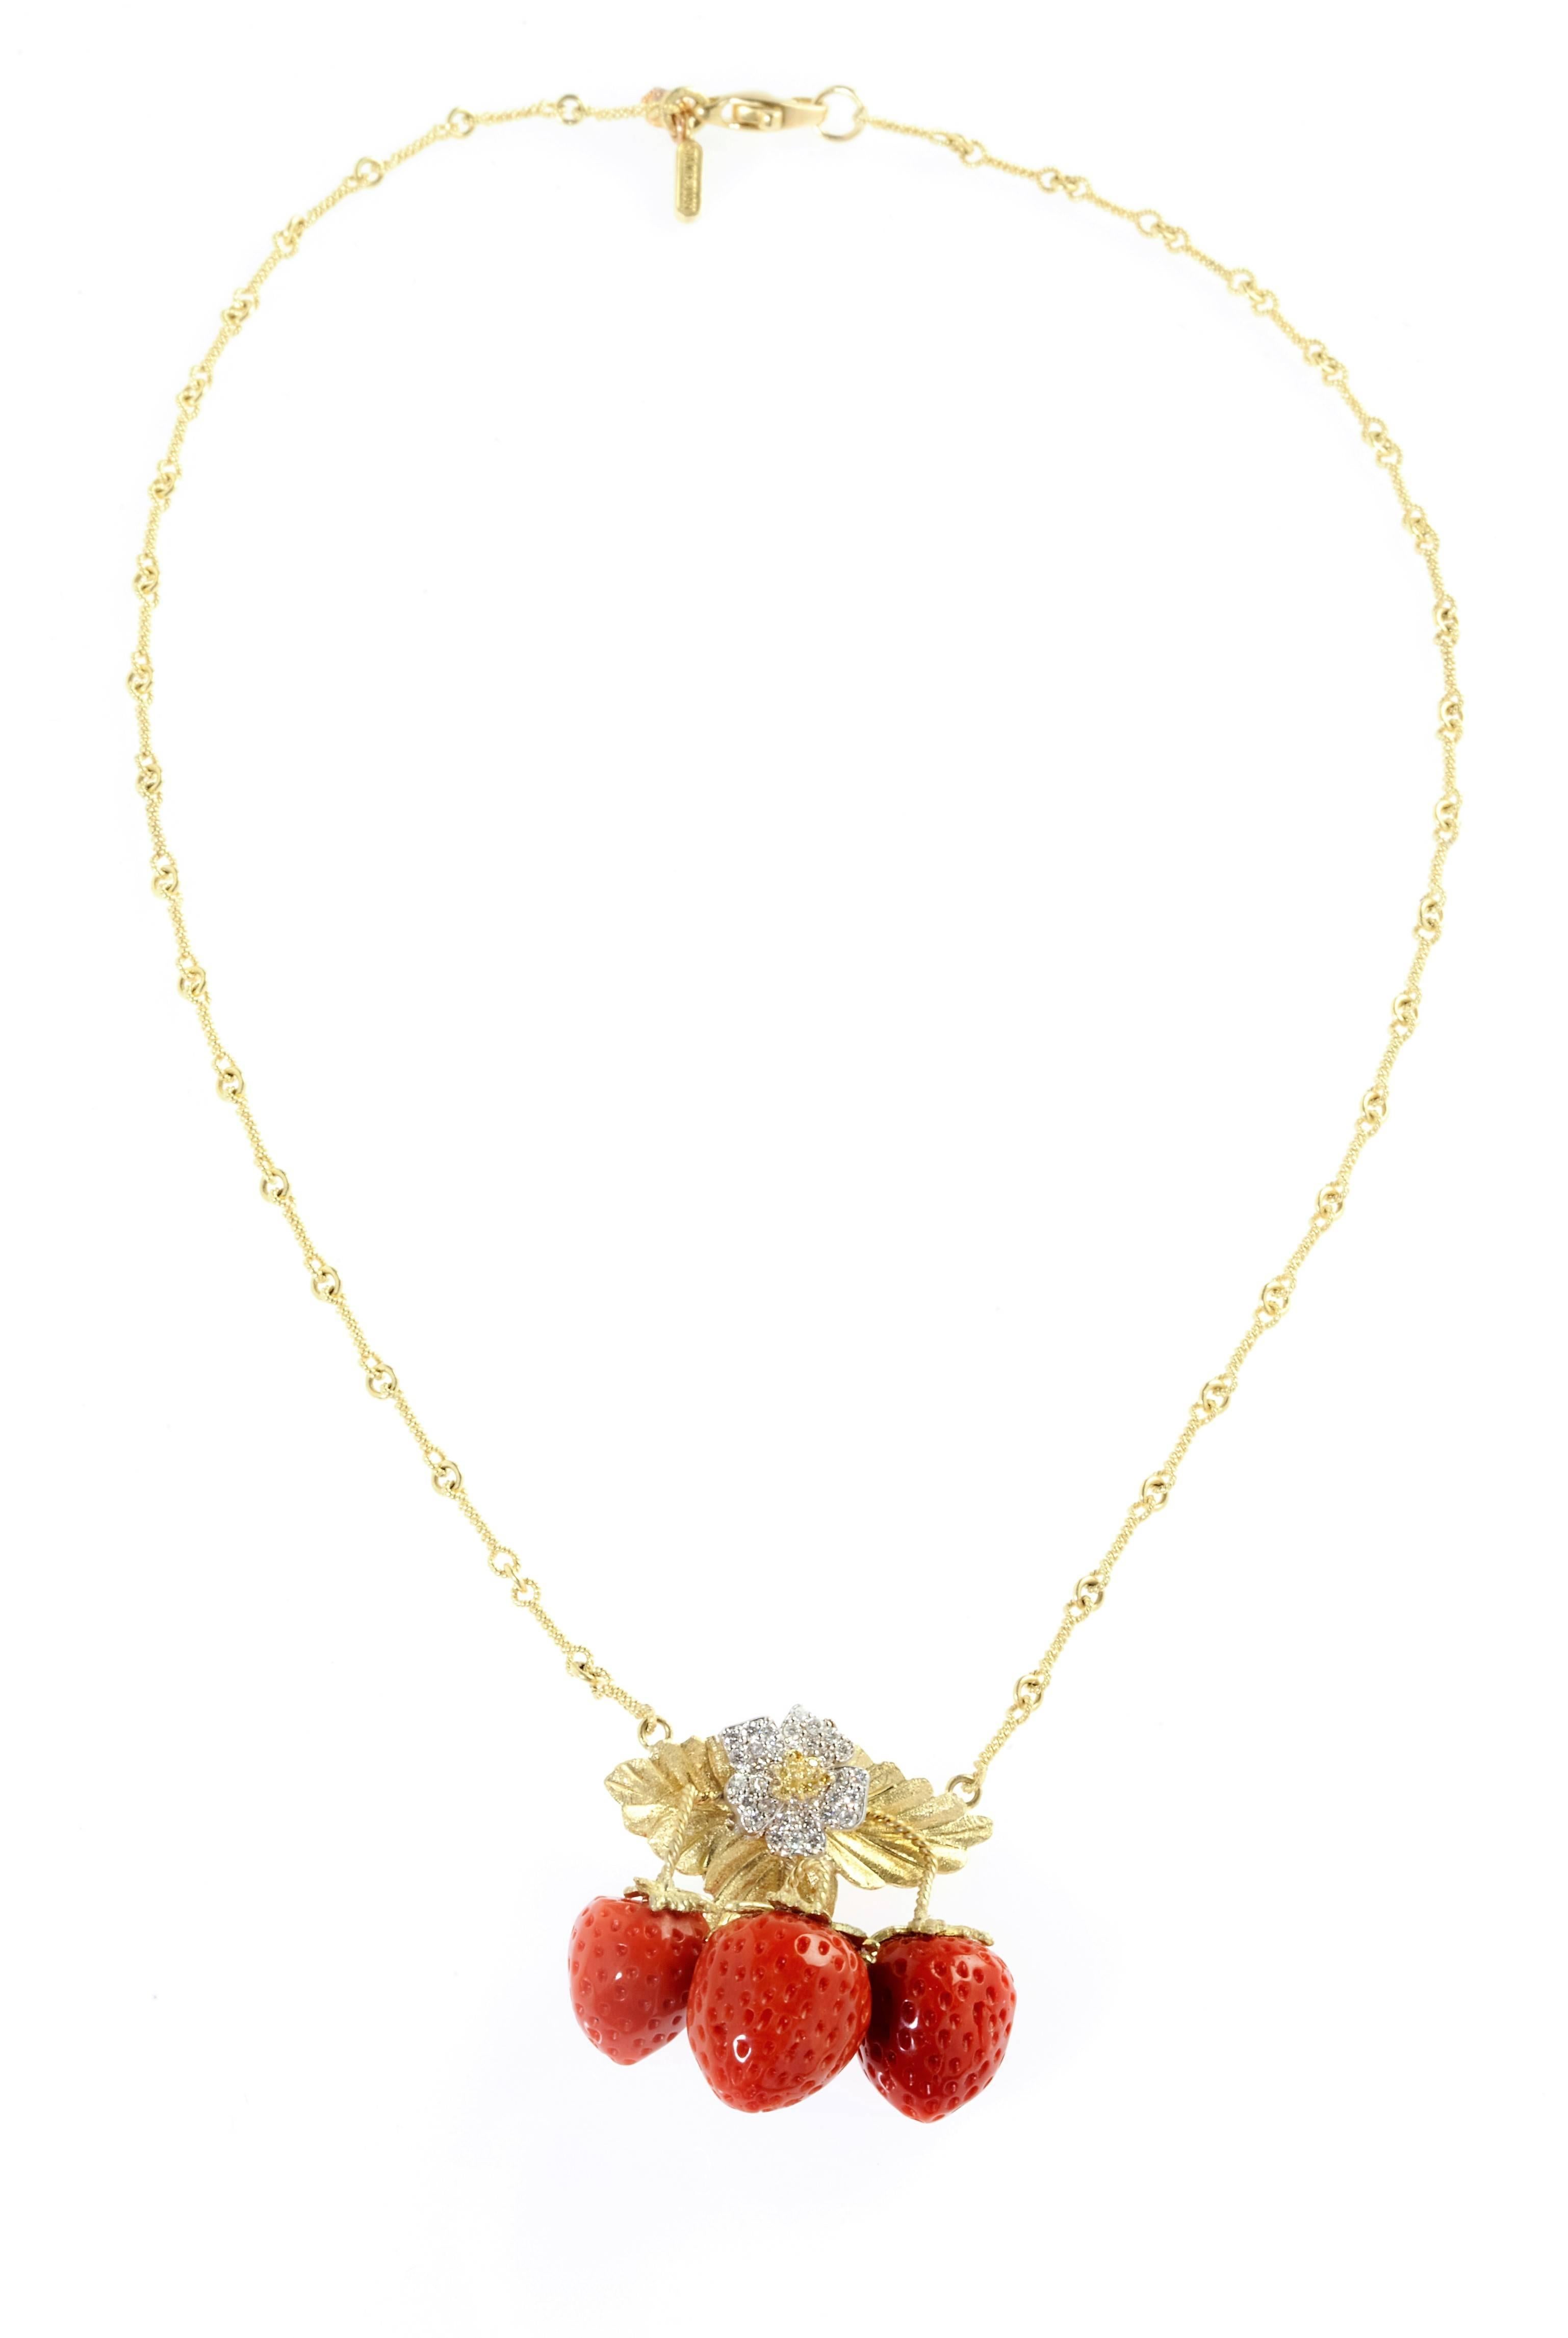 ONE OF A KIND Estate Strawberry Coral 18K Gold and Diamond Pendant necklace by Stambolian

Corals are special-cut strawberries, done by hand. They look extremely real.

Above the corals are our floral design-works, done with yellow and white